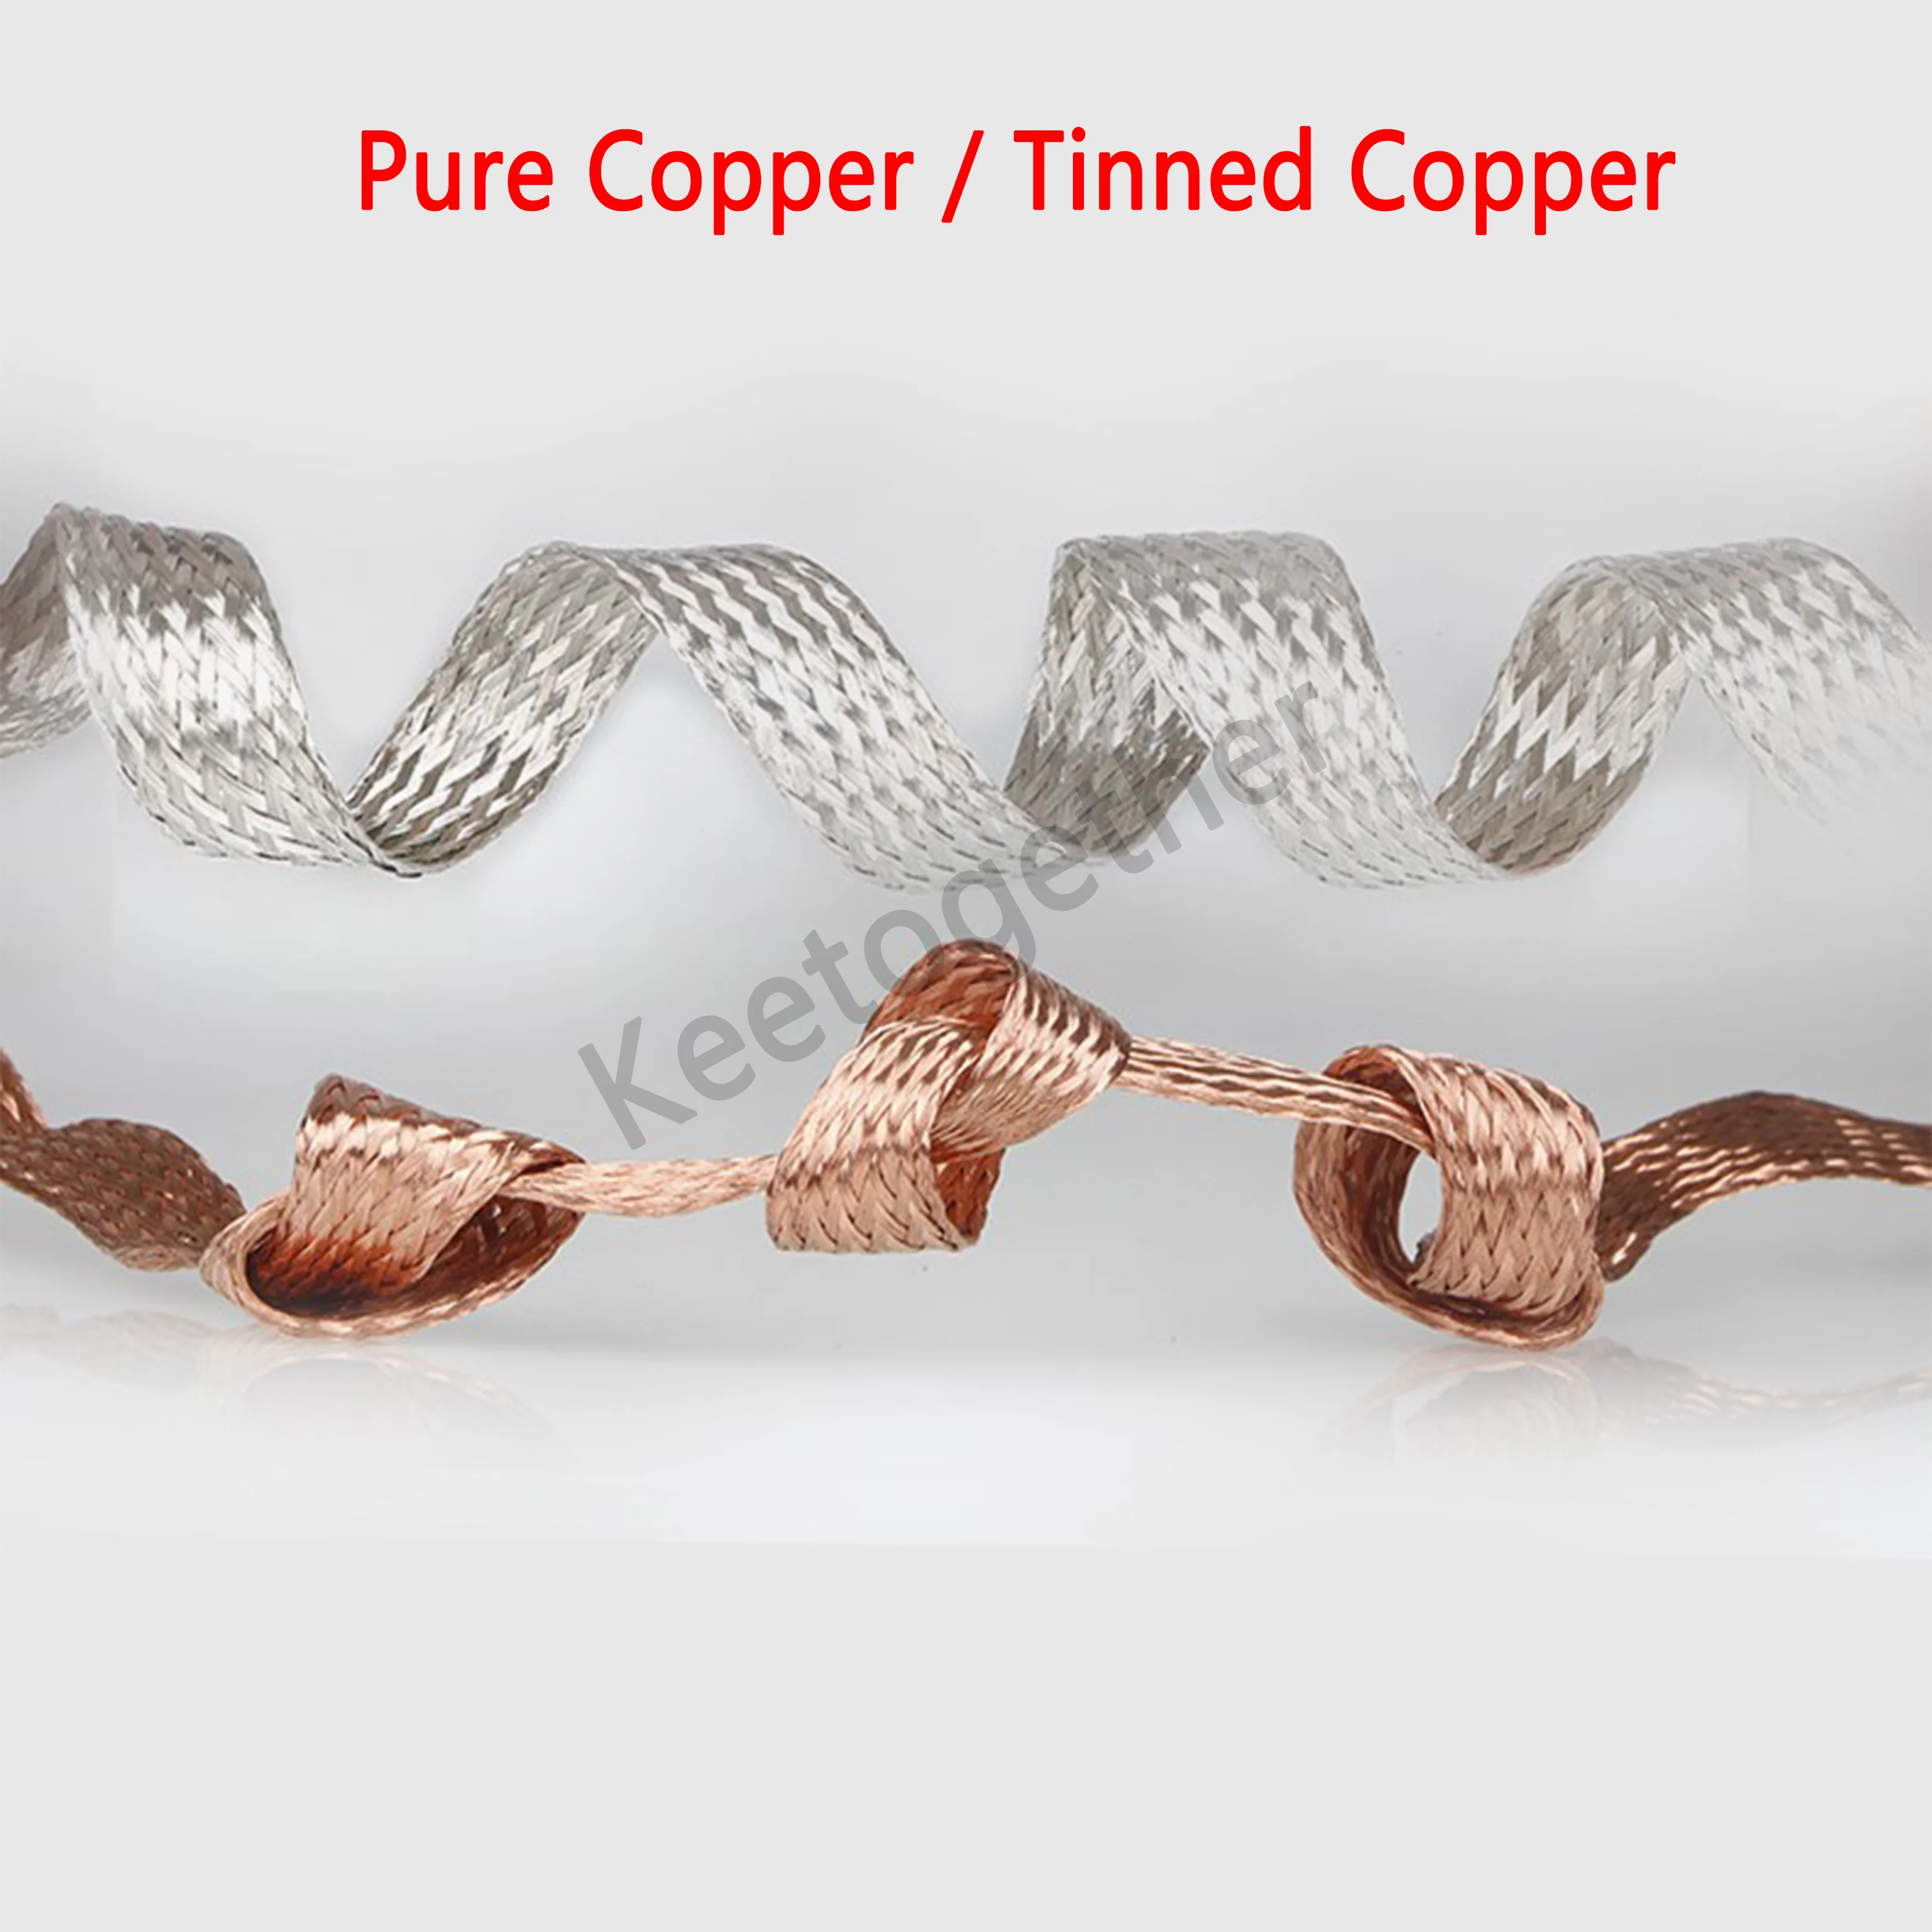 Tinned Copper Metal Shielding Braided Sleeving 2mm 4mm 6mm 8mm 10mm 12mm to 28mm 